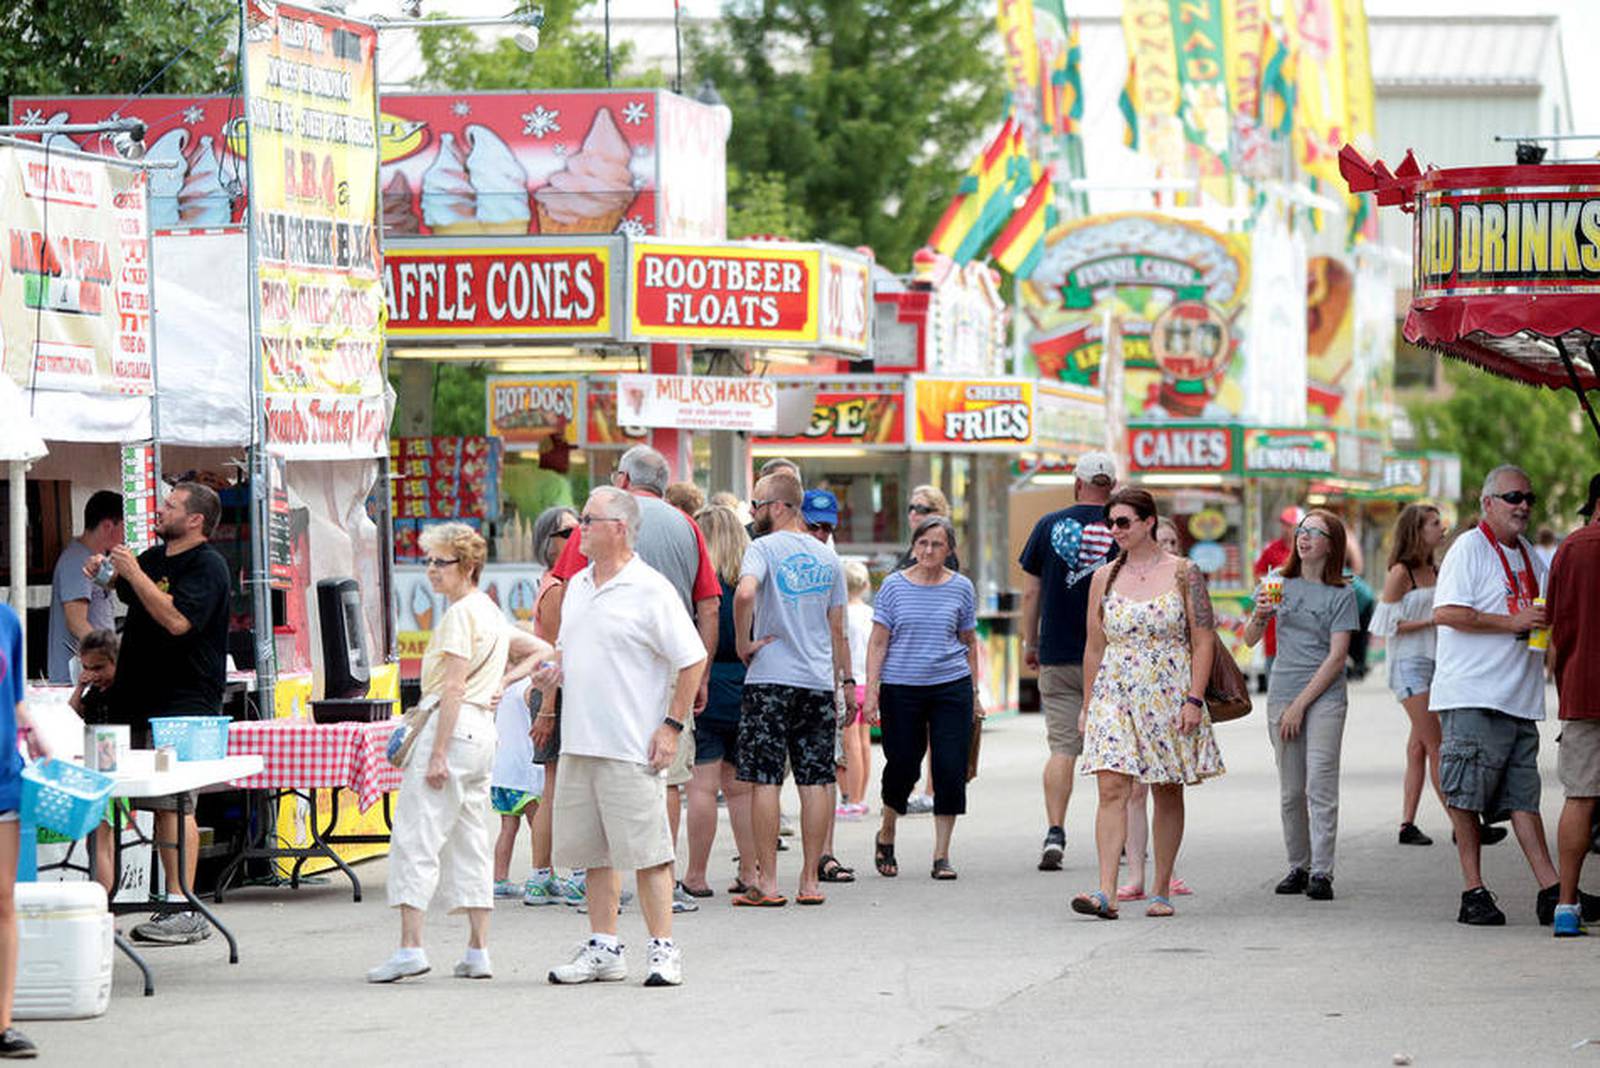 Kane County fair begins tomorrow afternoon; Here’s what you need to